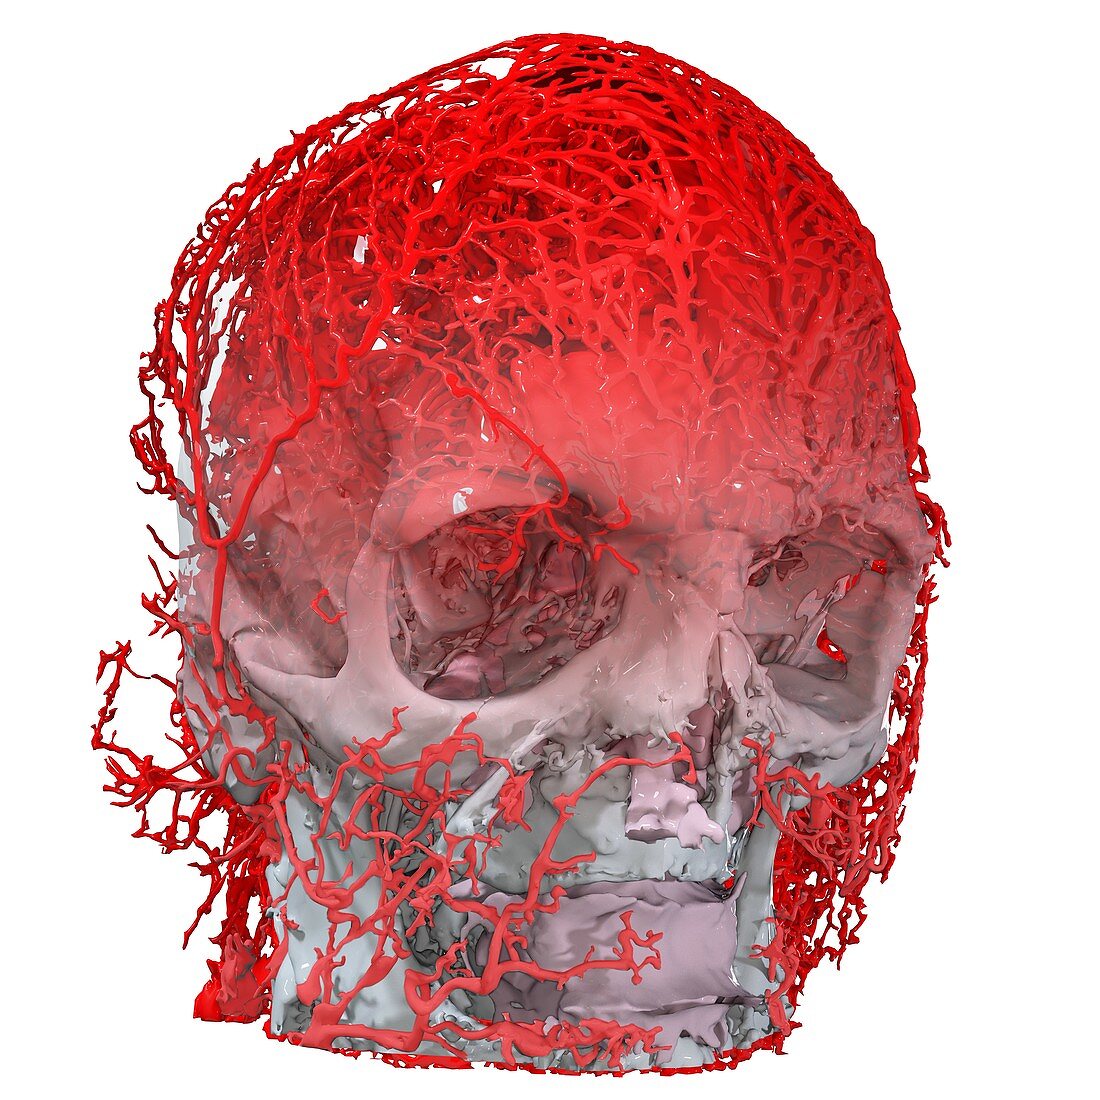 Human head and blood vessels, 3D CT scan